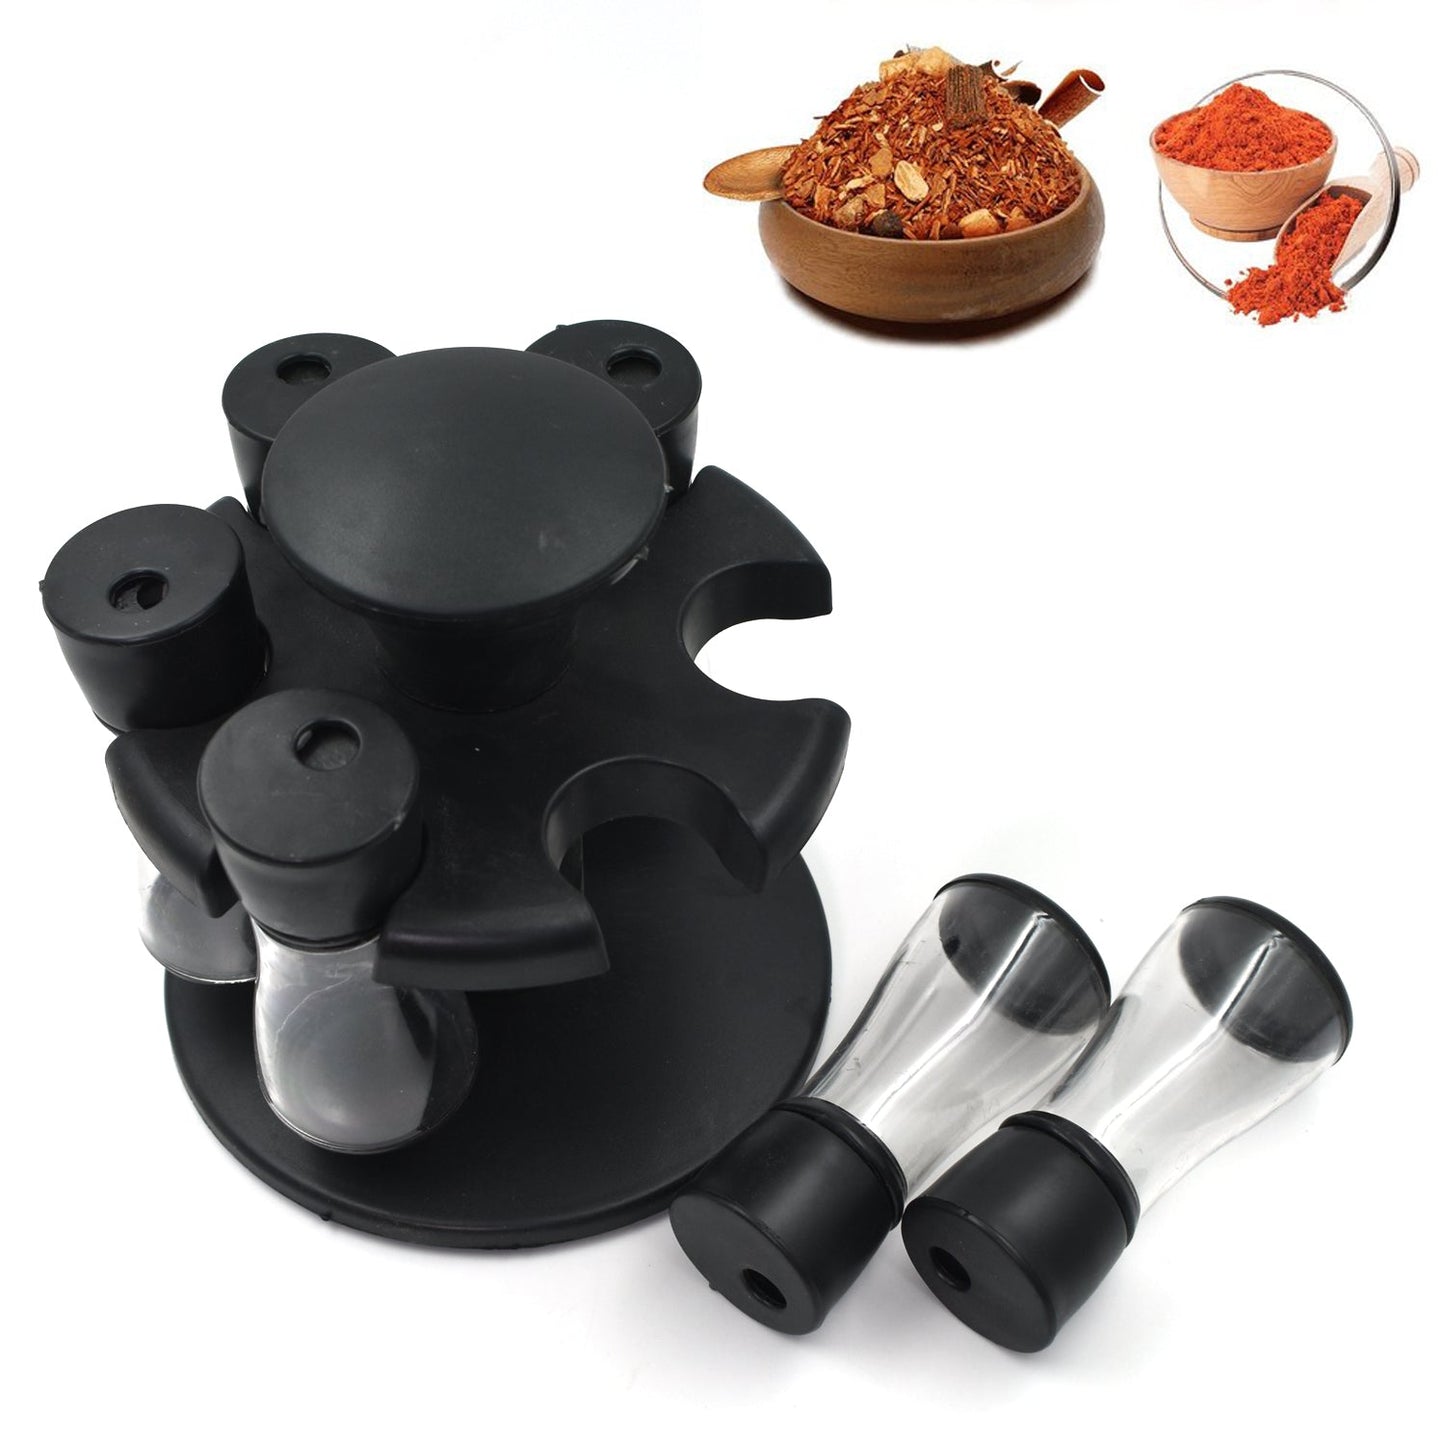 6 Pc Spice Rack Used For Storing Spices Easily In An Ordered Manner.